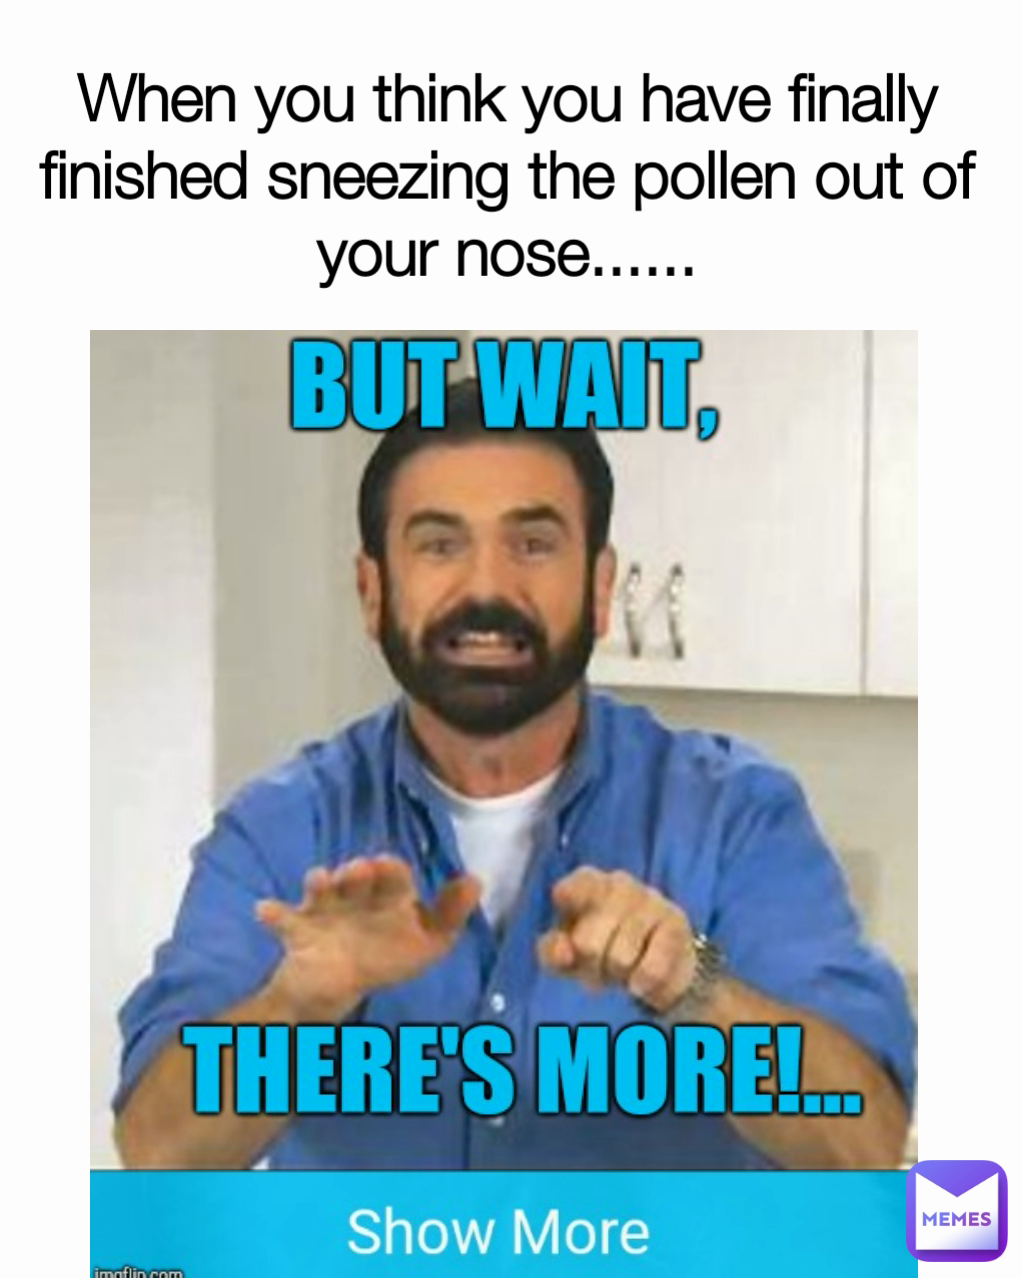 When you think you have finally finished sneezing the pollen out of your nose......